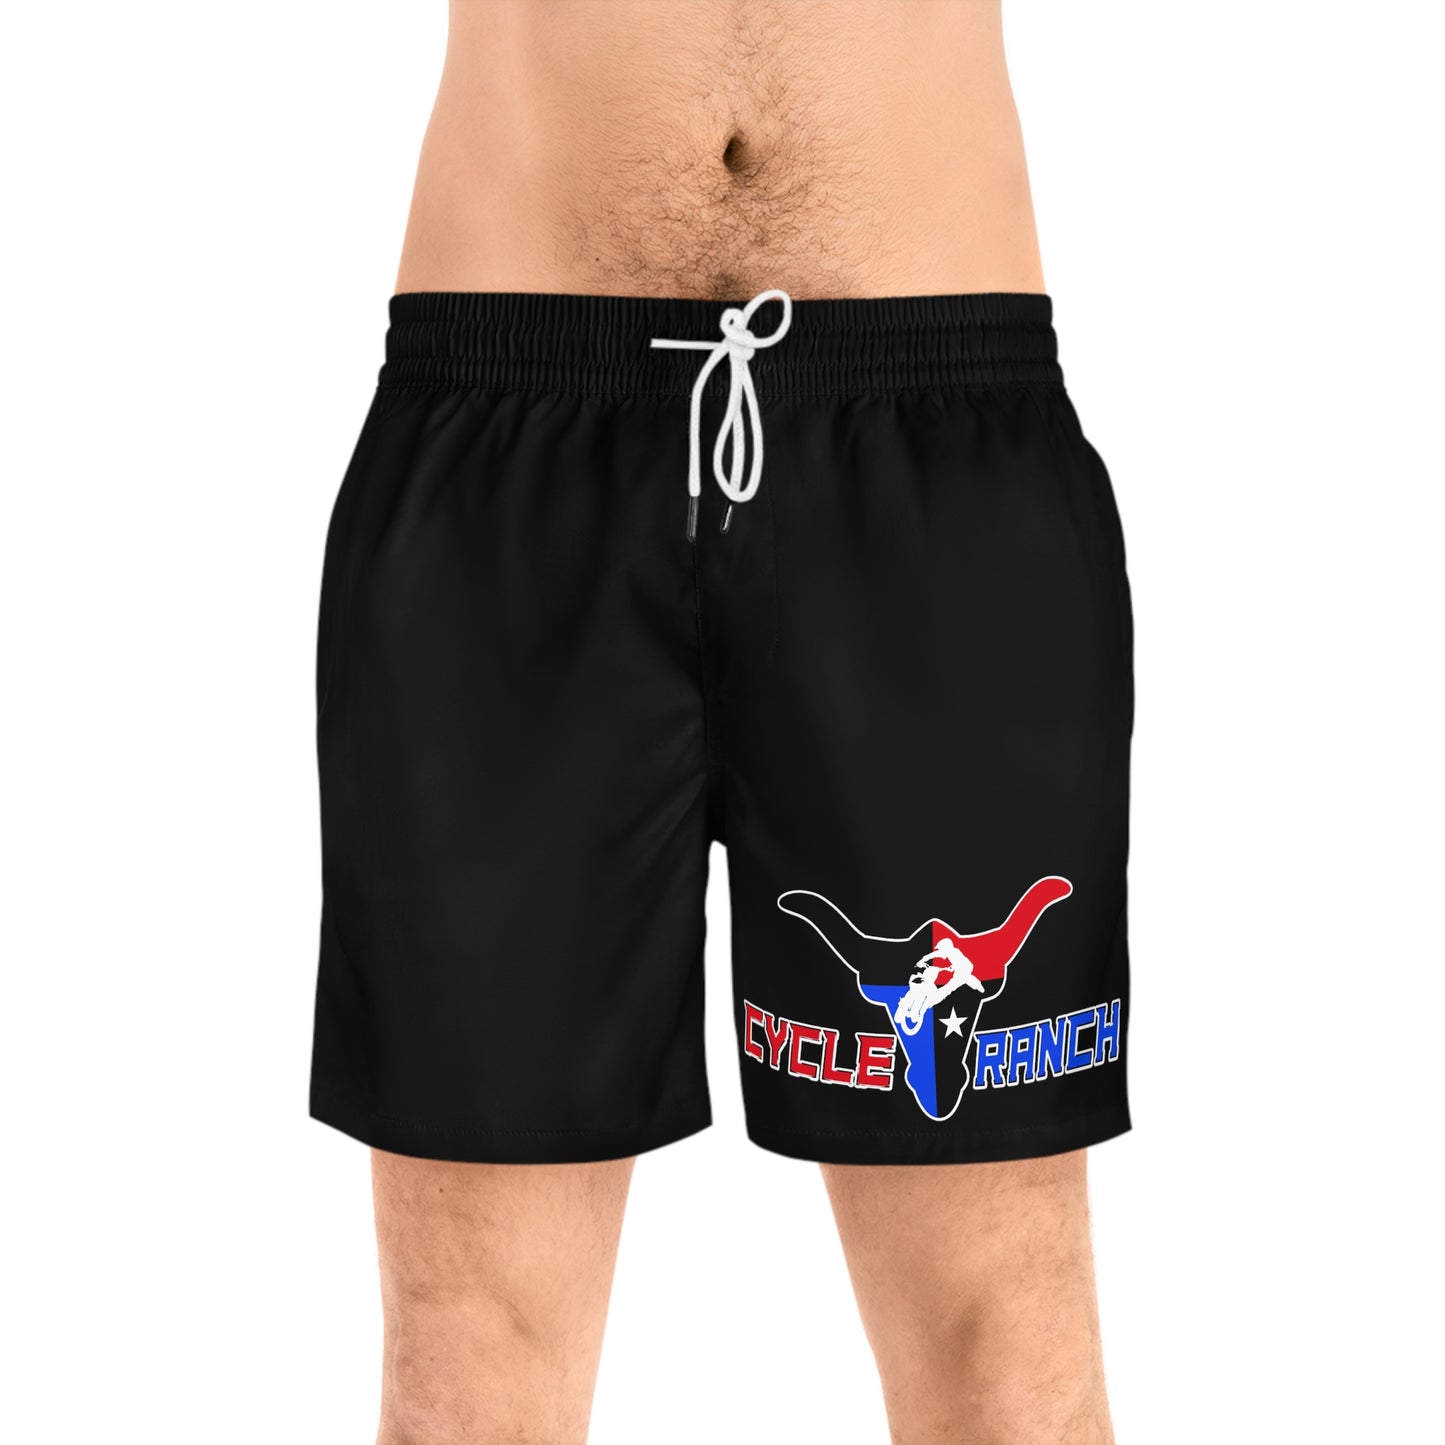 CYCLE RANCH SWIM SHORTS BY (AOP)